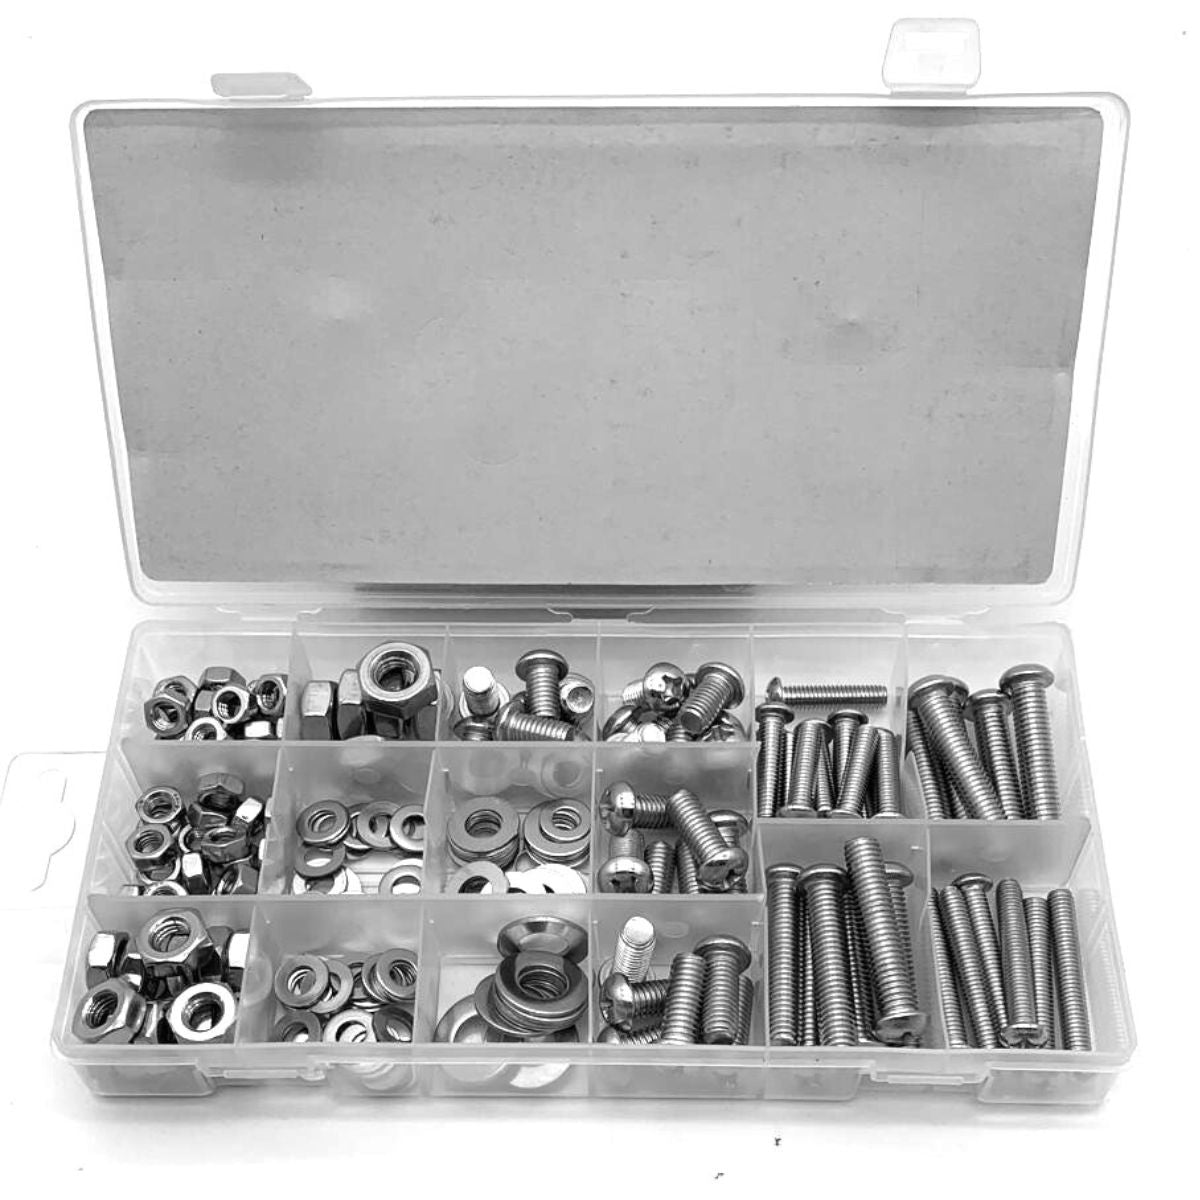 224 Stainless Steel Nut Bolt & Washer Assortment Kit - South East Clearance Centre